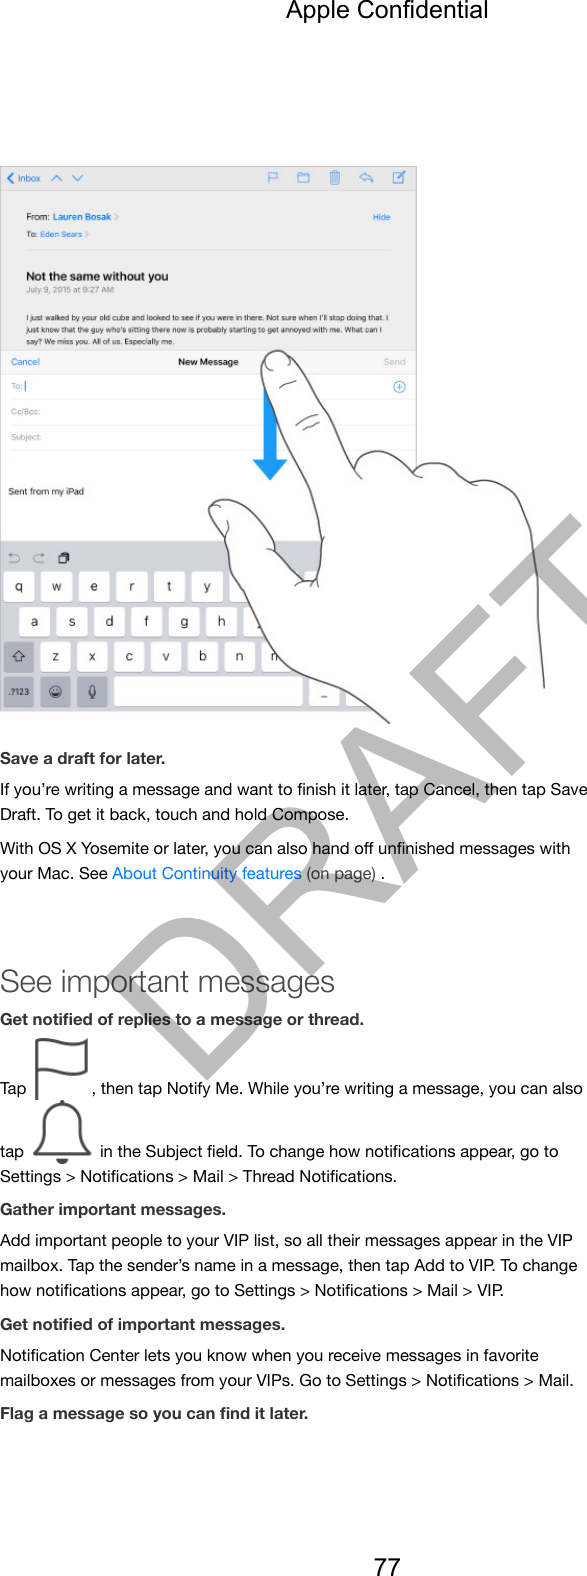 Save a draft for later.If you’re writing a message and want to ﬁnish it later, tap Cancel, then tap SaveDraft. To get it back, touch and hold Compose.With OS X Yosemite or later, you can also hand oﬀ unﬁnished messages withyour Mac. See About Continuity features (on page) .See important messagesGet notiﬁed of replies to a message or thread.Tap  , then tap Notify Me. While you’re writing a message, you can alsotap   in the Subject ﬁeld. To change how notiﬁcations appear, go toSettings &gt; Notiﬁcations &gt; Mail &gt; Thread Notiﬁcations.Gather important messages.Add important people to your VIP list, so all their messages appear in the VIPmailbox. Tap the sender’s name in a message, then tap Add to VIP. To changehow notiﬁcations appear, go to Settings &gt; Notiﬁcations &gt; Mail &gt; VIP.Get notiﬁed of important messages.Notiﬁcation Center lets you know when you receive messages in favoritemailboxes or messages from your VIPs. Go to Settings &gt; Notiﬁcations &gt; Mail.Flag a message so you can ﬁnd it later.Apple Confidential77DRAFT